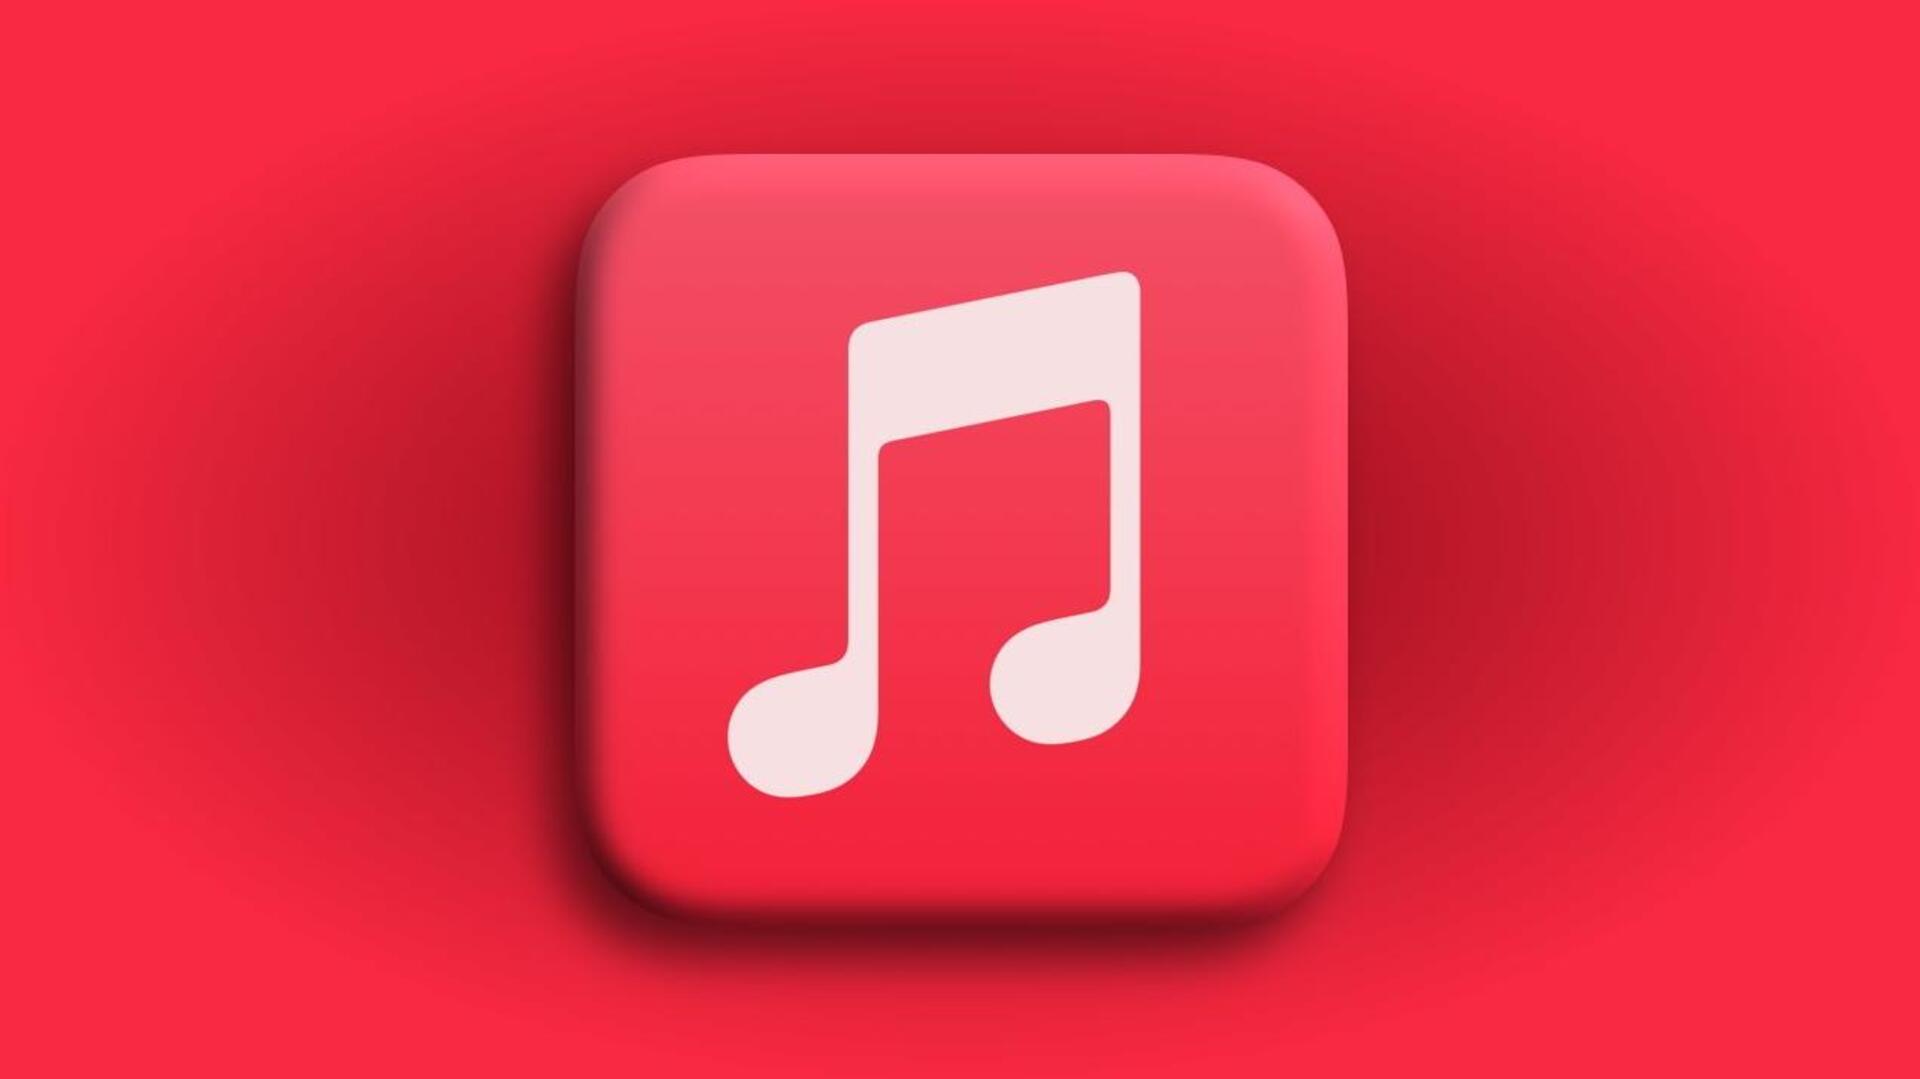 Apple Music's Discovery Station offers curated music feed to users